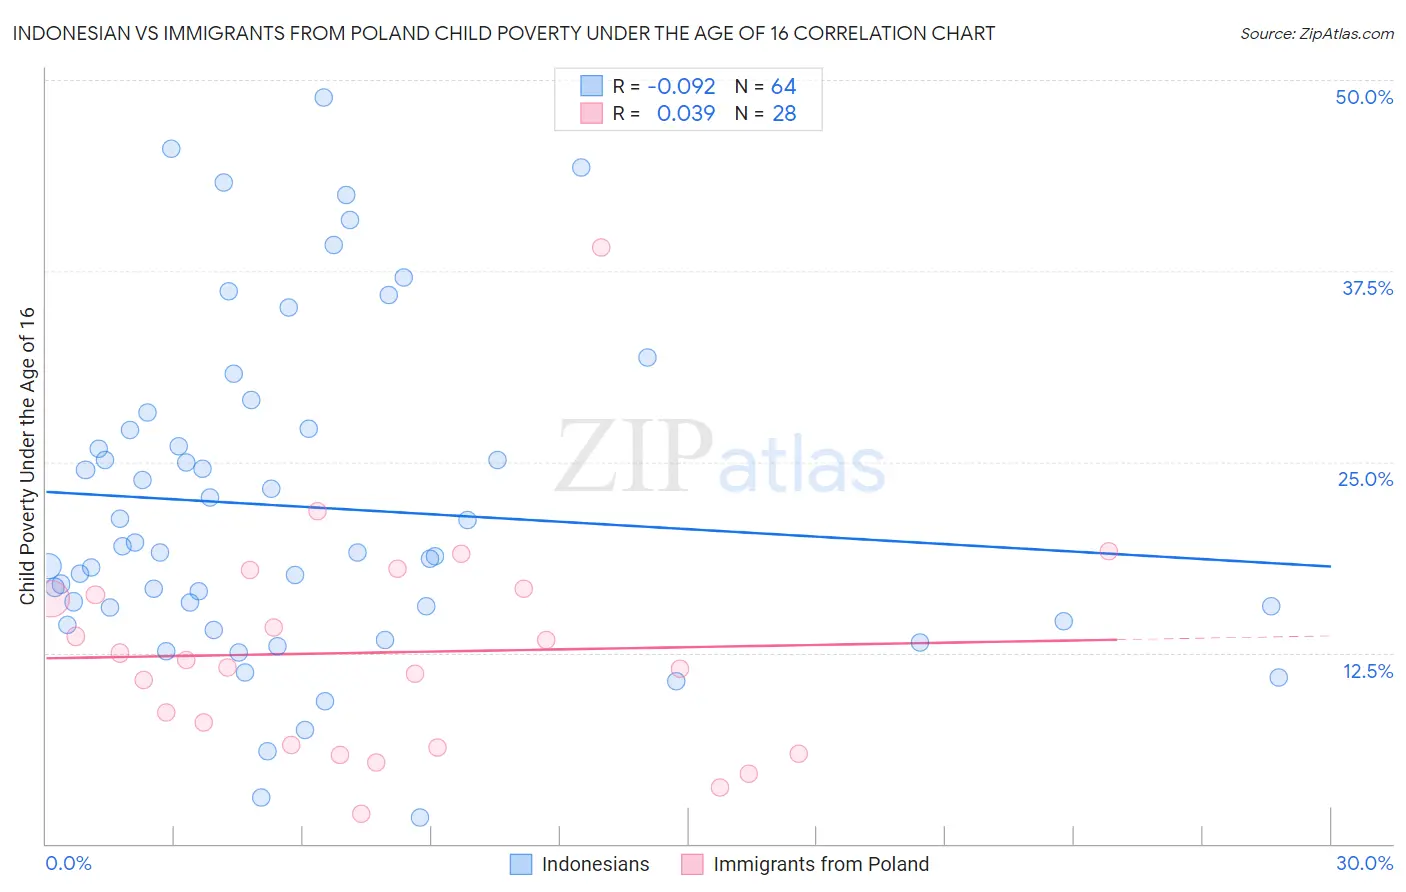 Indonesian vs Immigrants from Poland Child Poverty Under the Age of 16